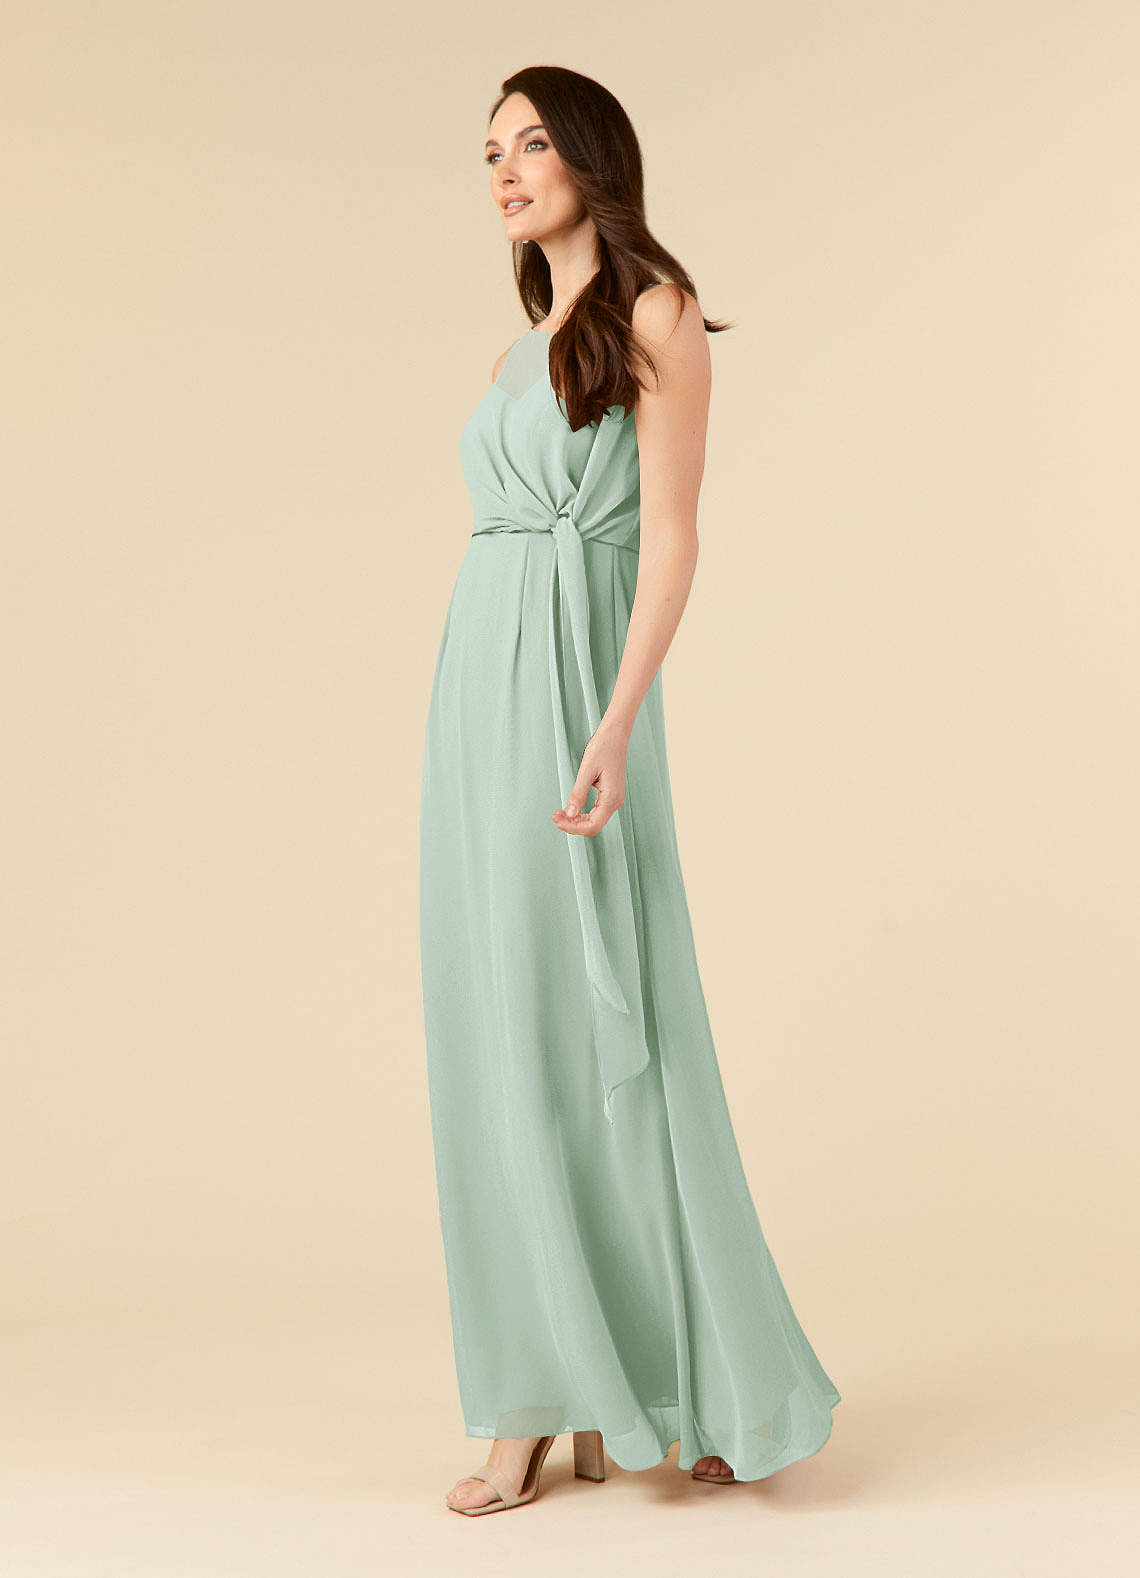 Azazie Marchioness Mother of the Bride Dresses A-Line Scoop Pleated Chiffon Floor-Length Dress image1